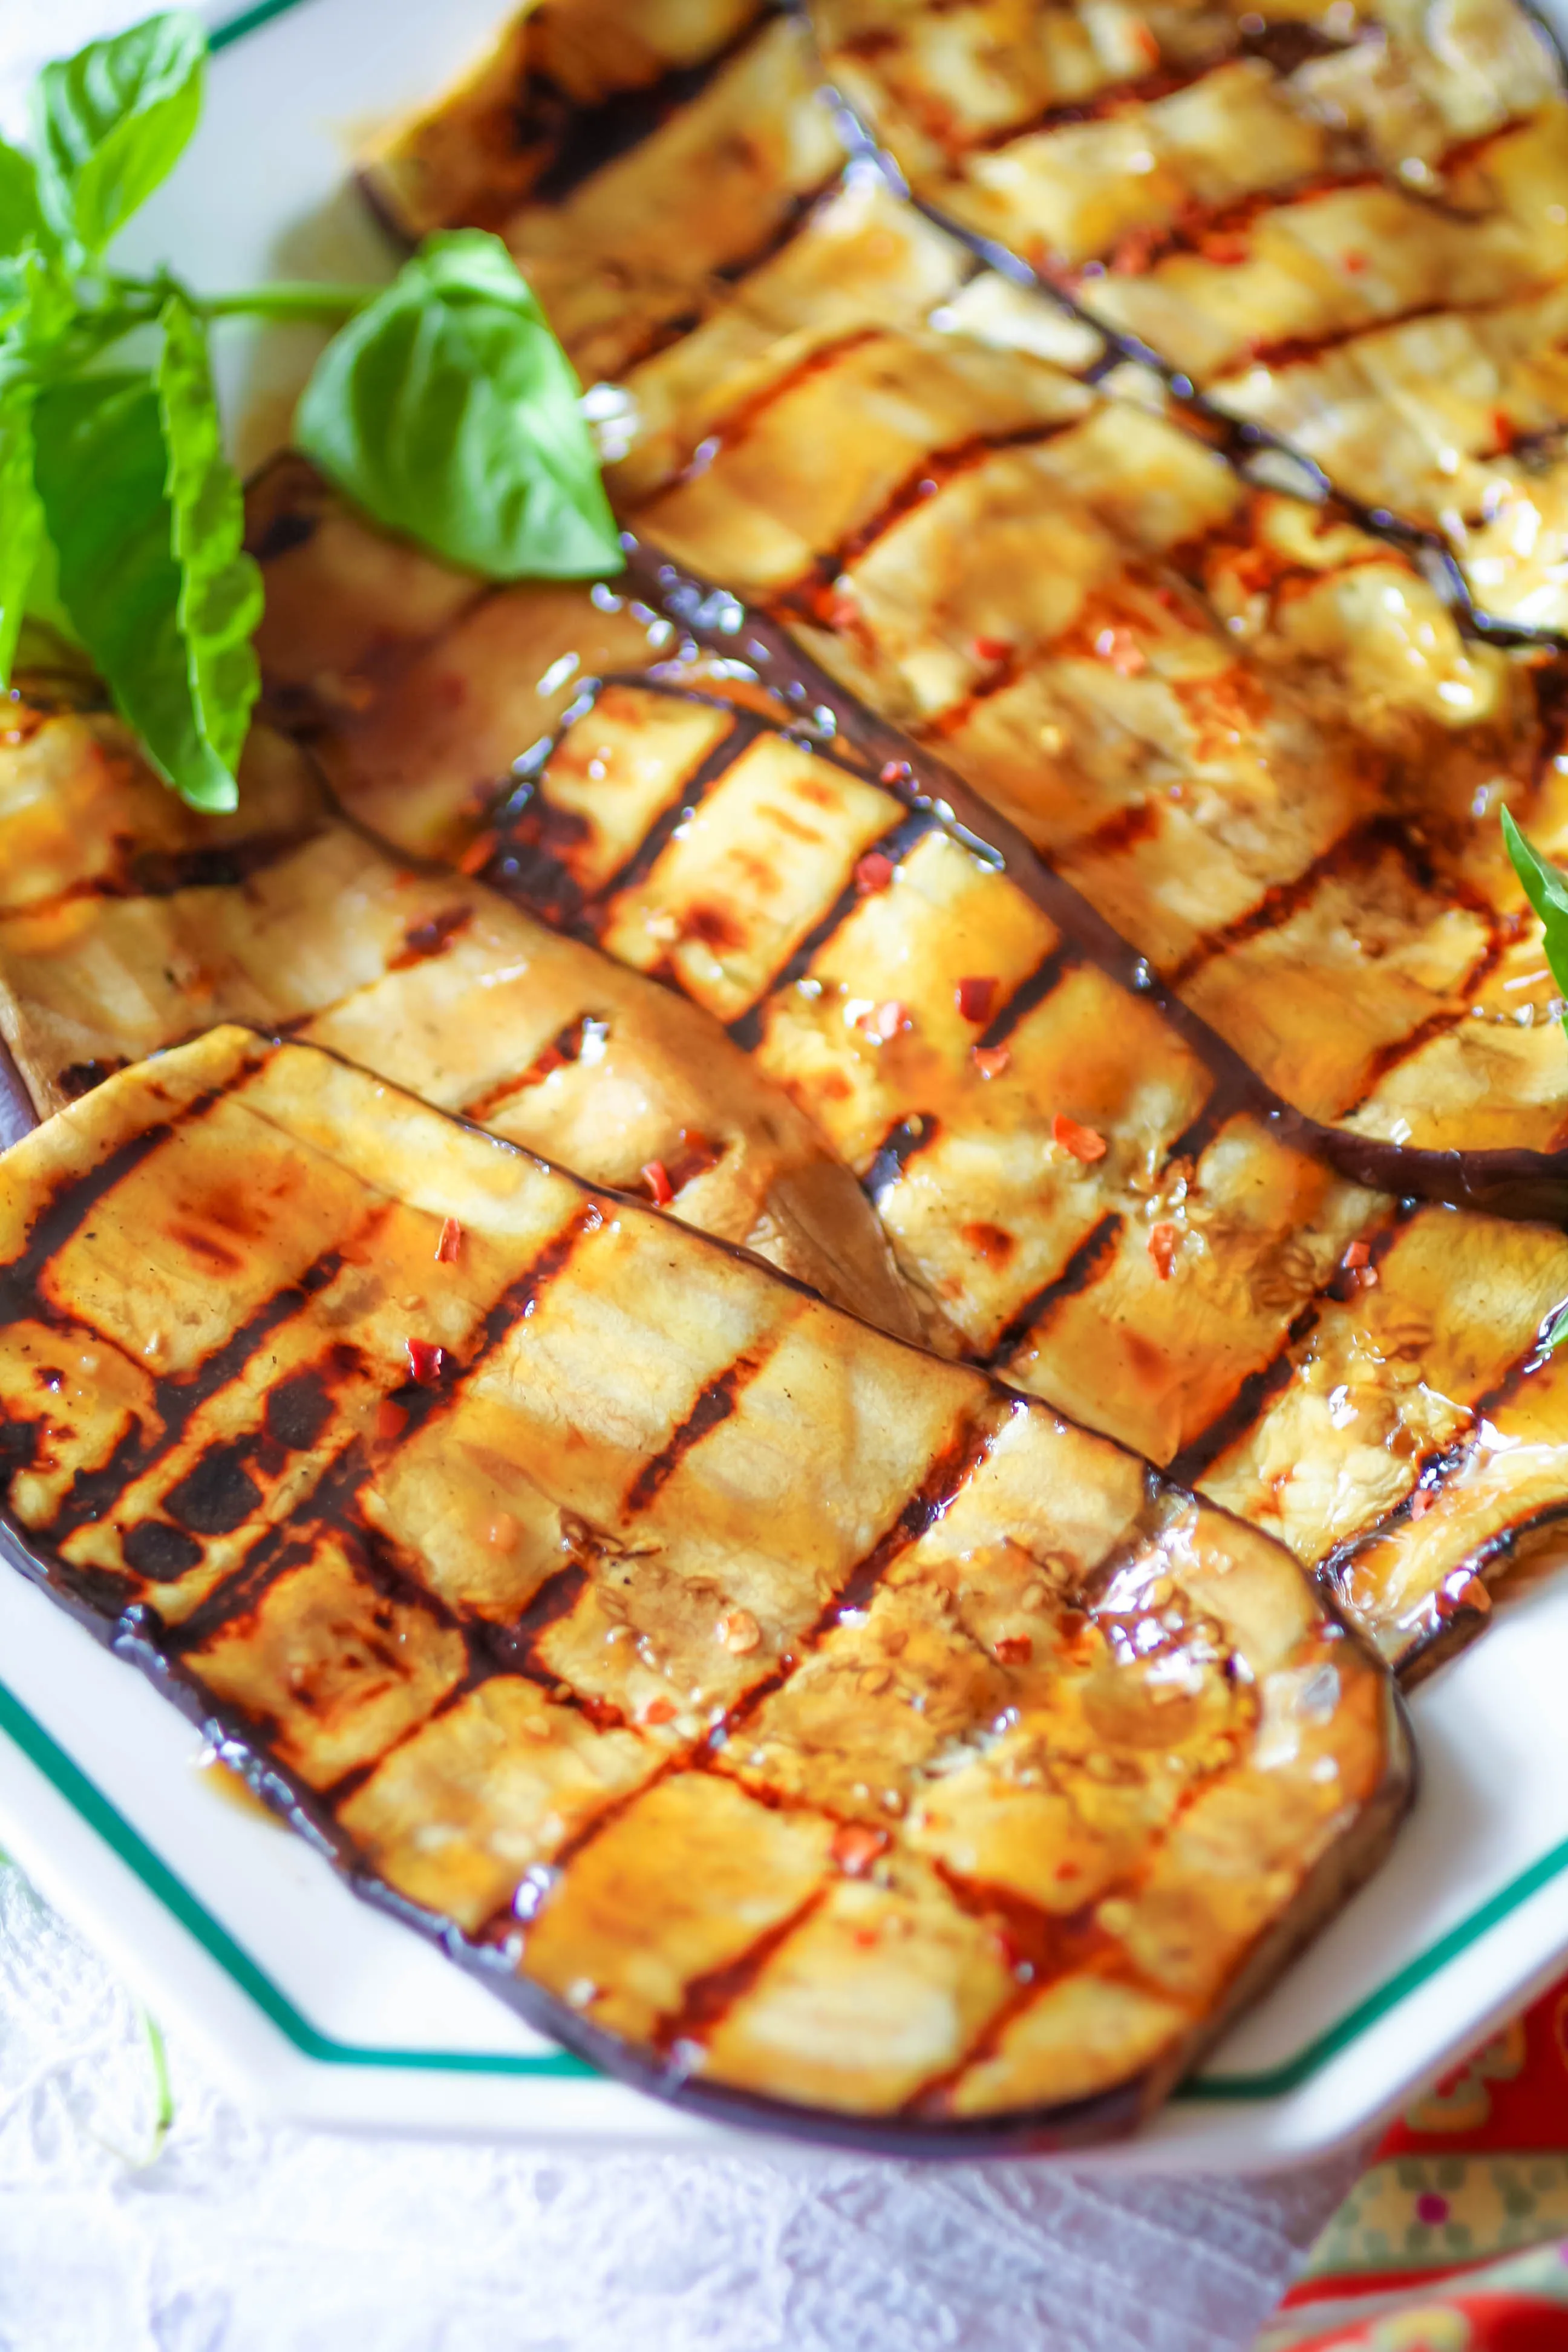 Grilled Eggplant with Teriyaki is a tasty summer dish. Grilled Eggplant with Teriyaki is great for a grilled dish!